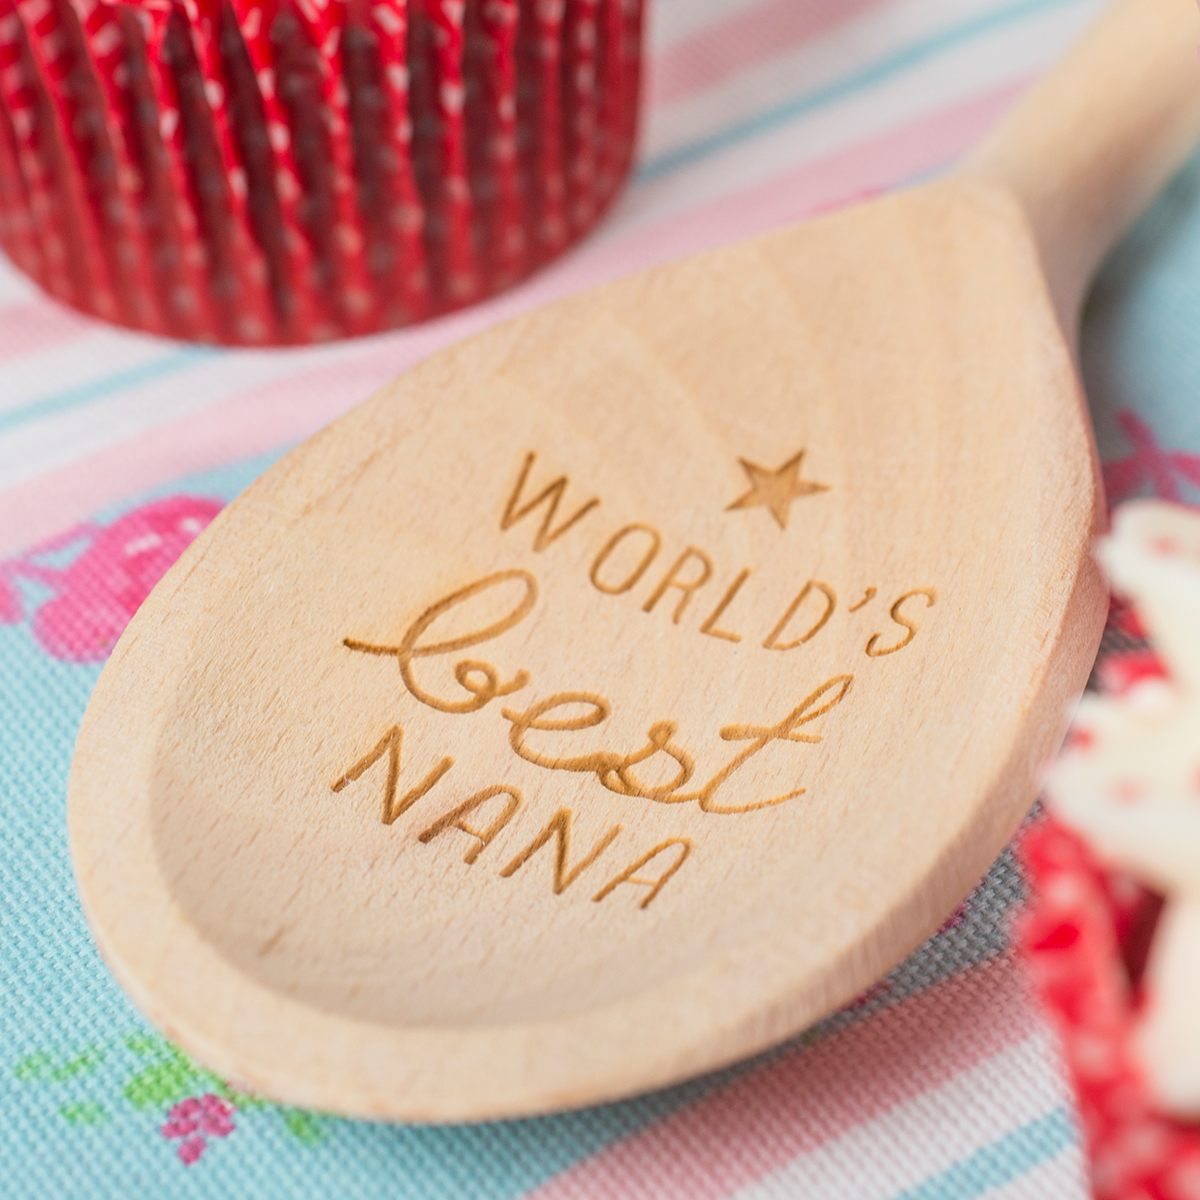 Engraved Wooden Spoon - World's Best